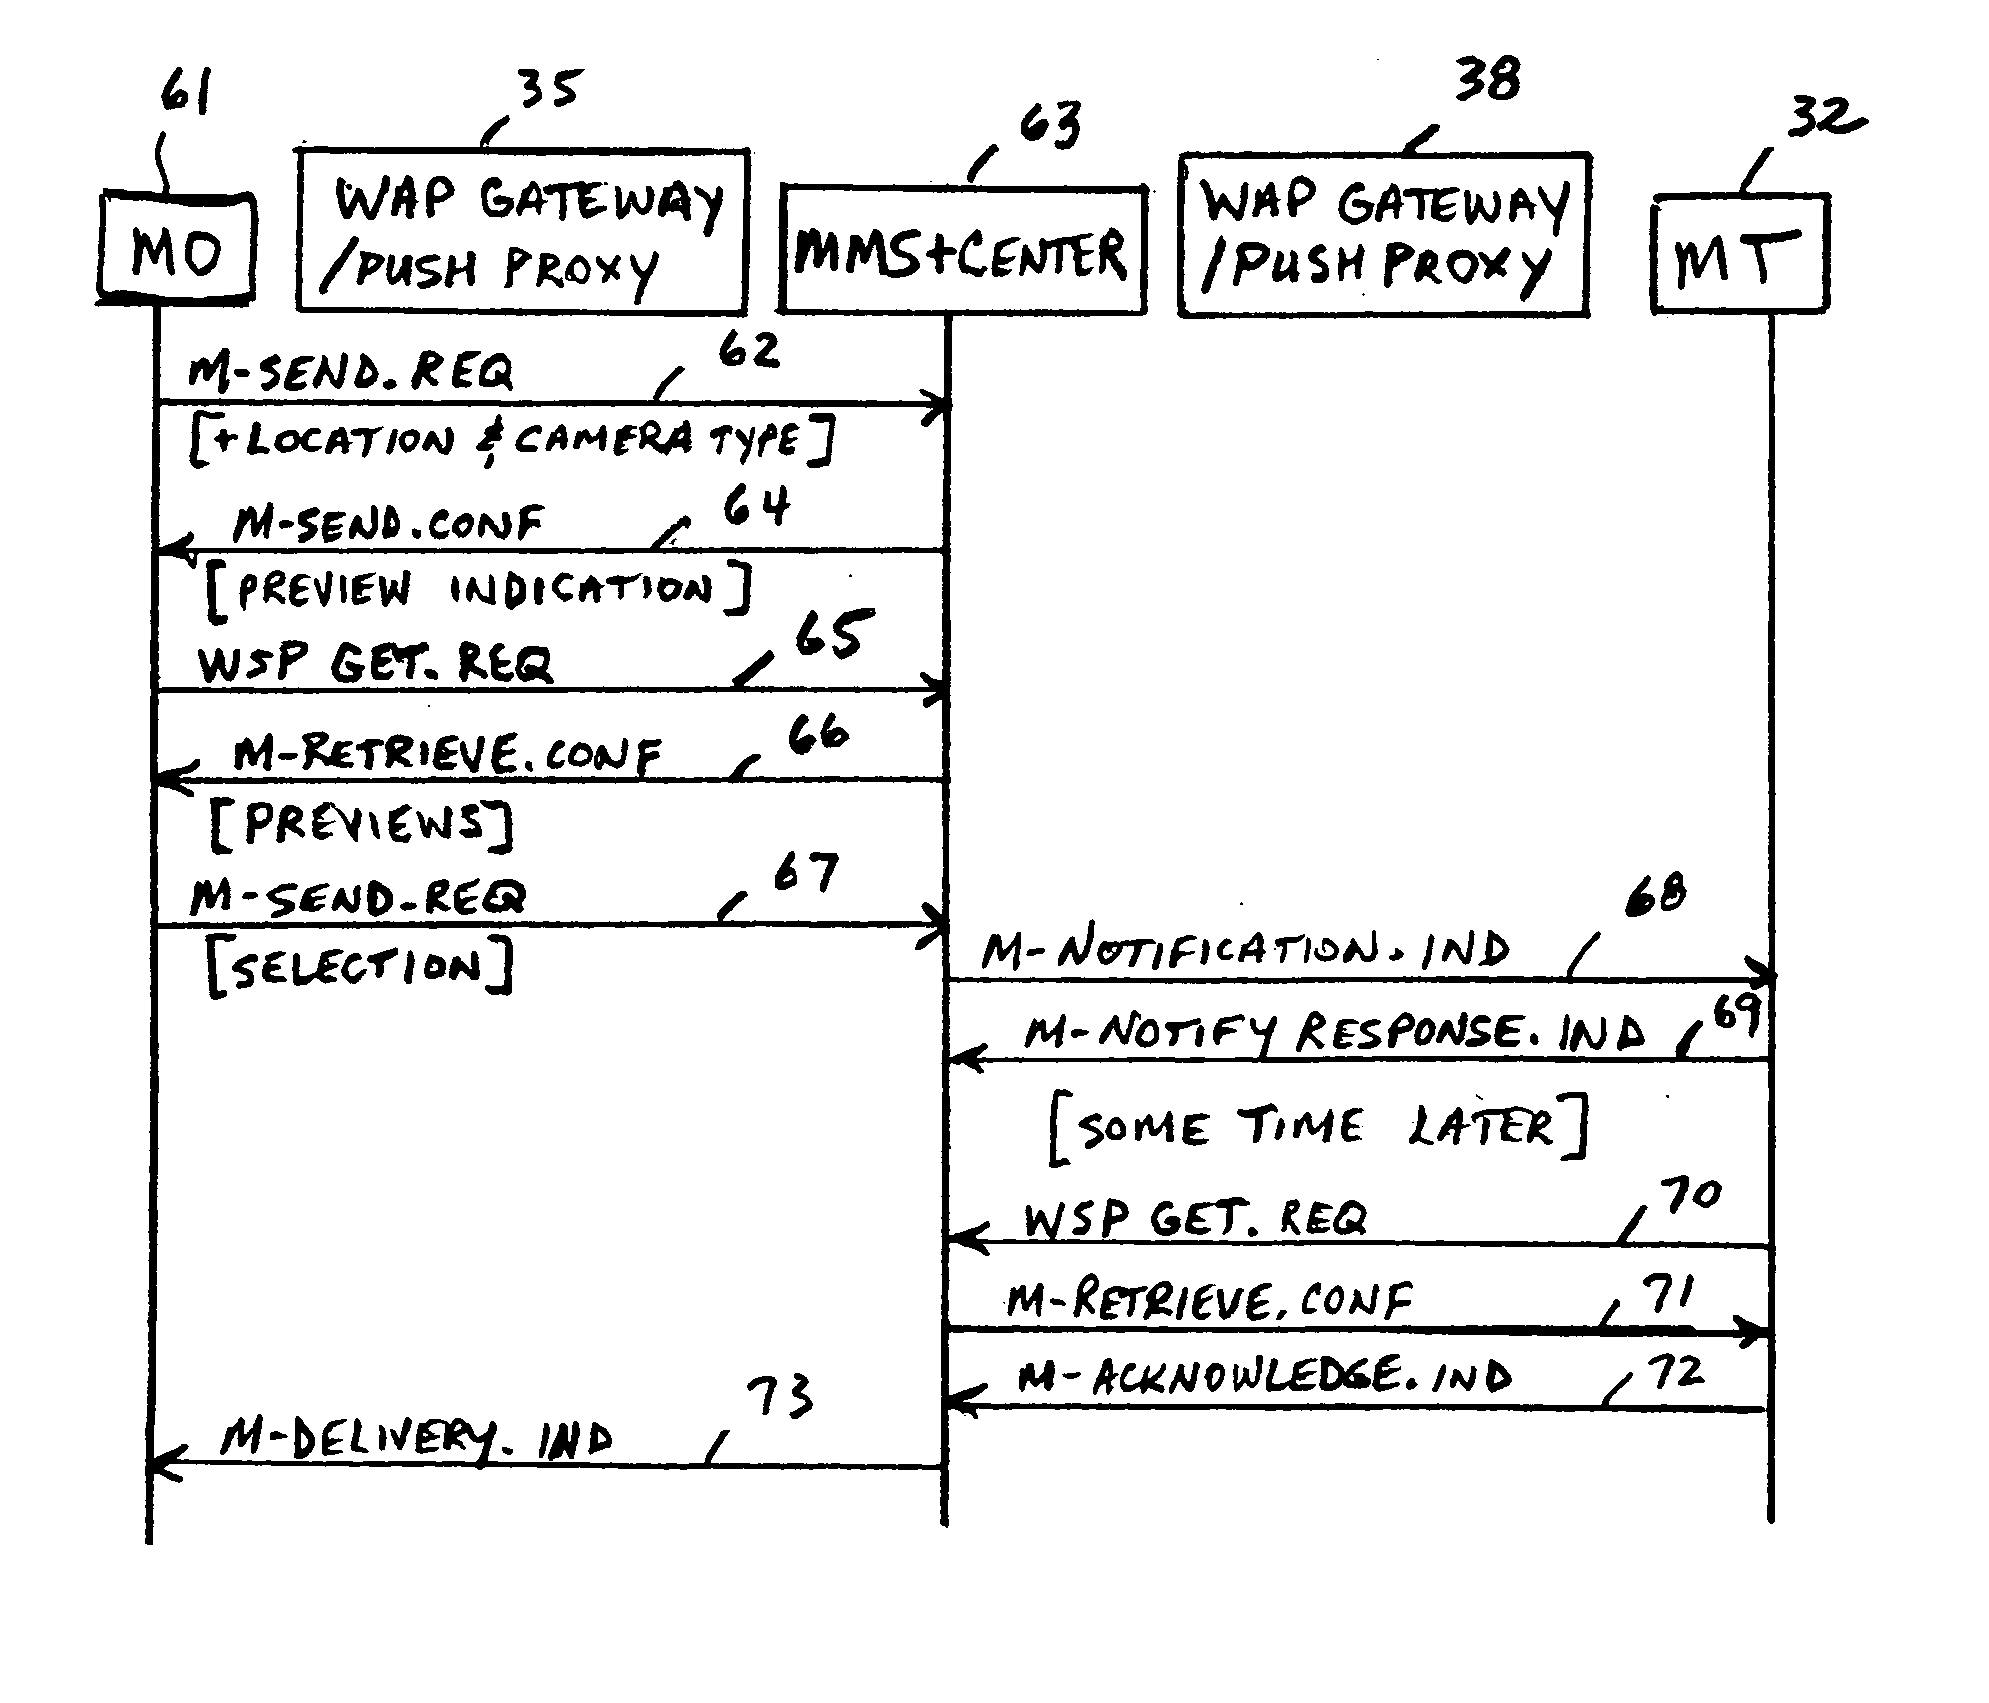 System and method for automatic modification of multimedia messages